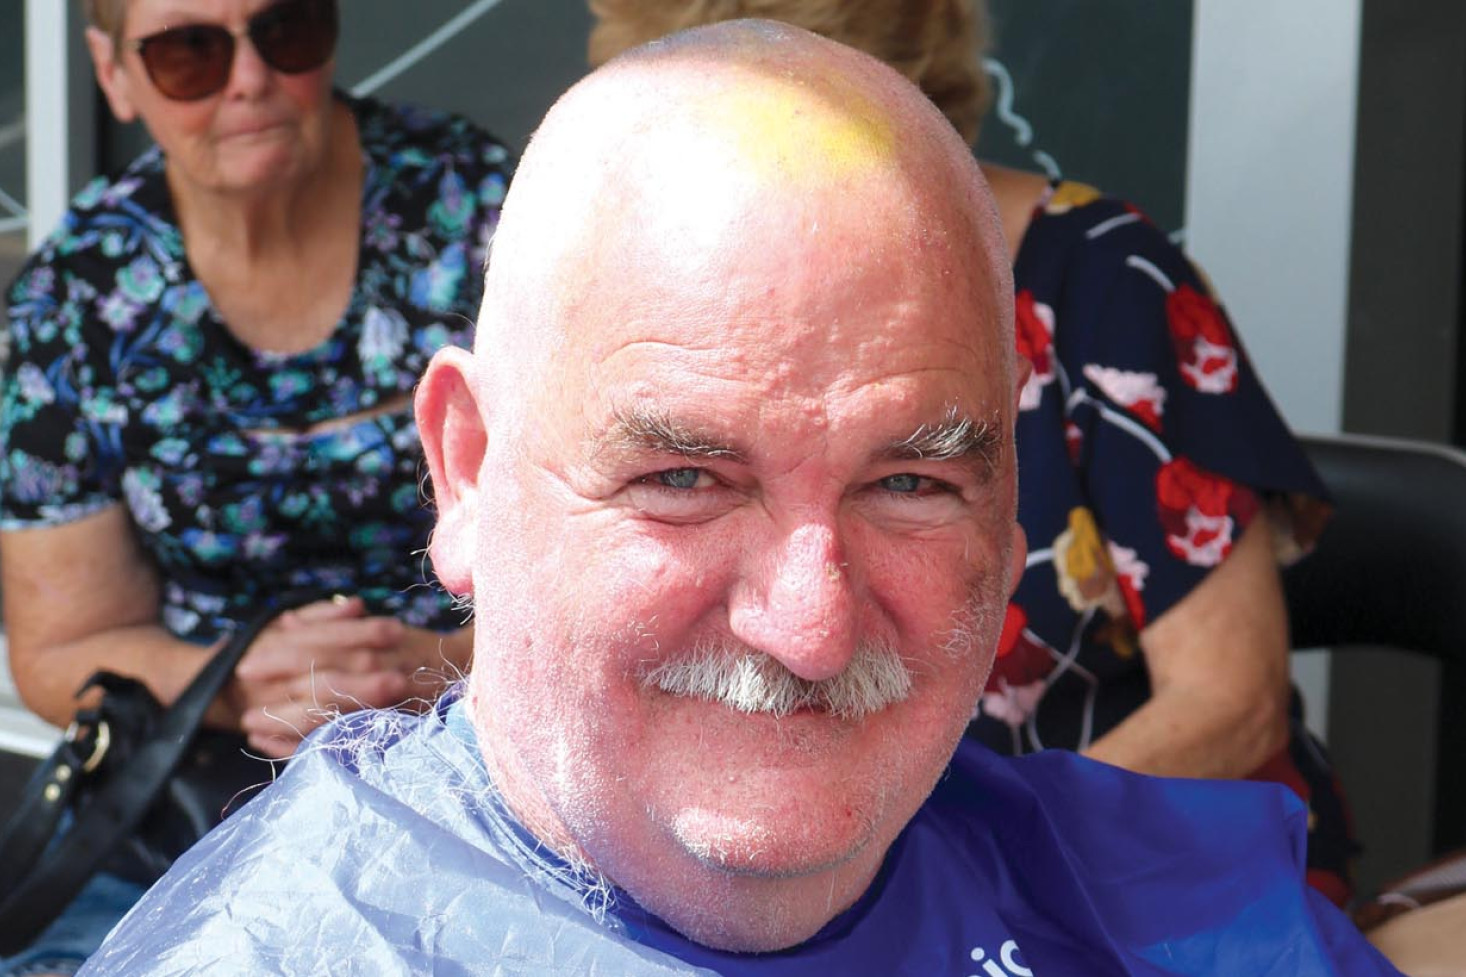 Three years worth of hair, now gone, after Garry Mann recently shaved it all for a worthy cause.